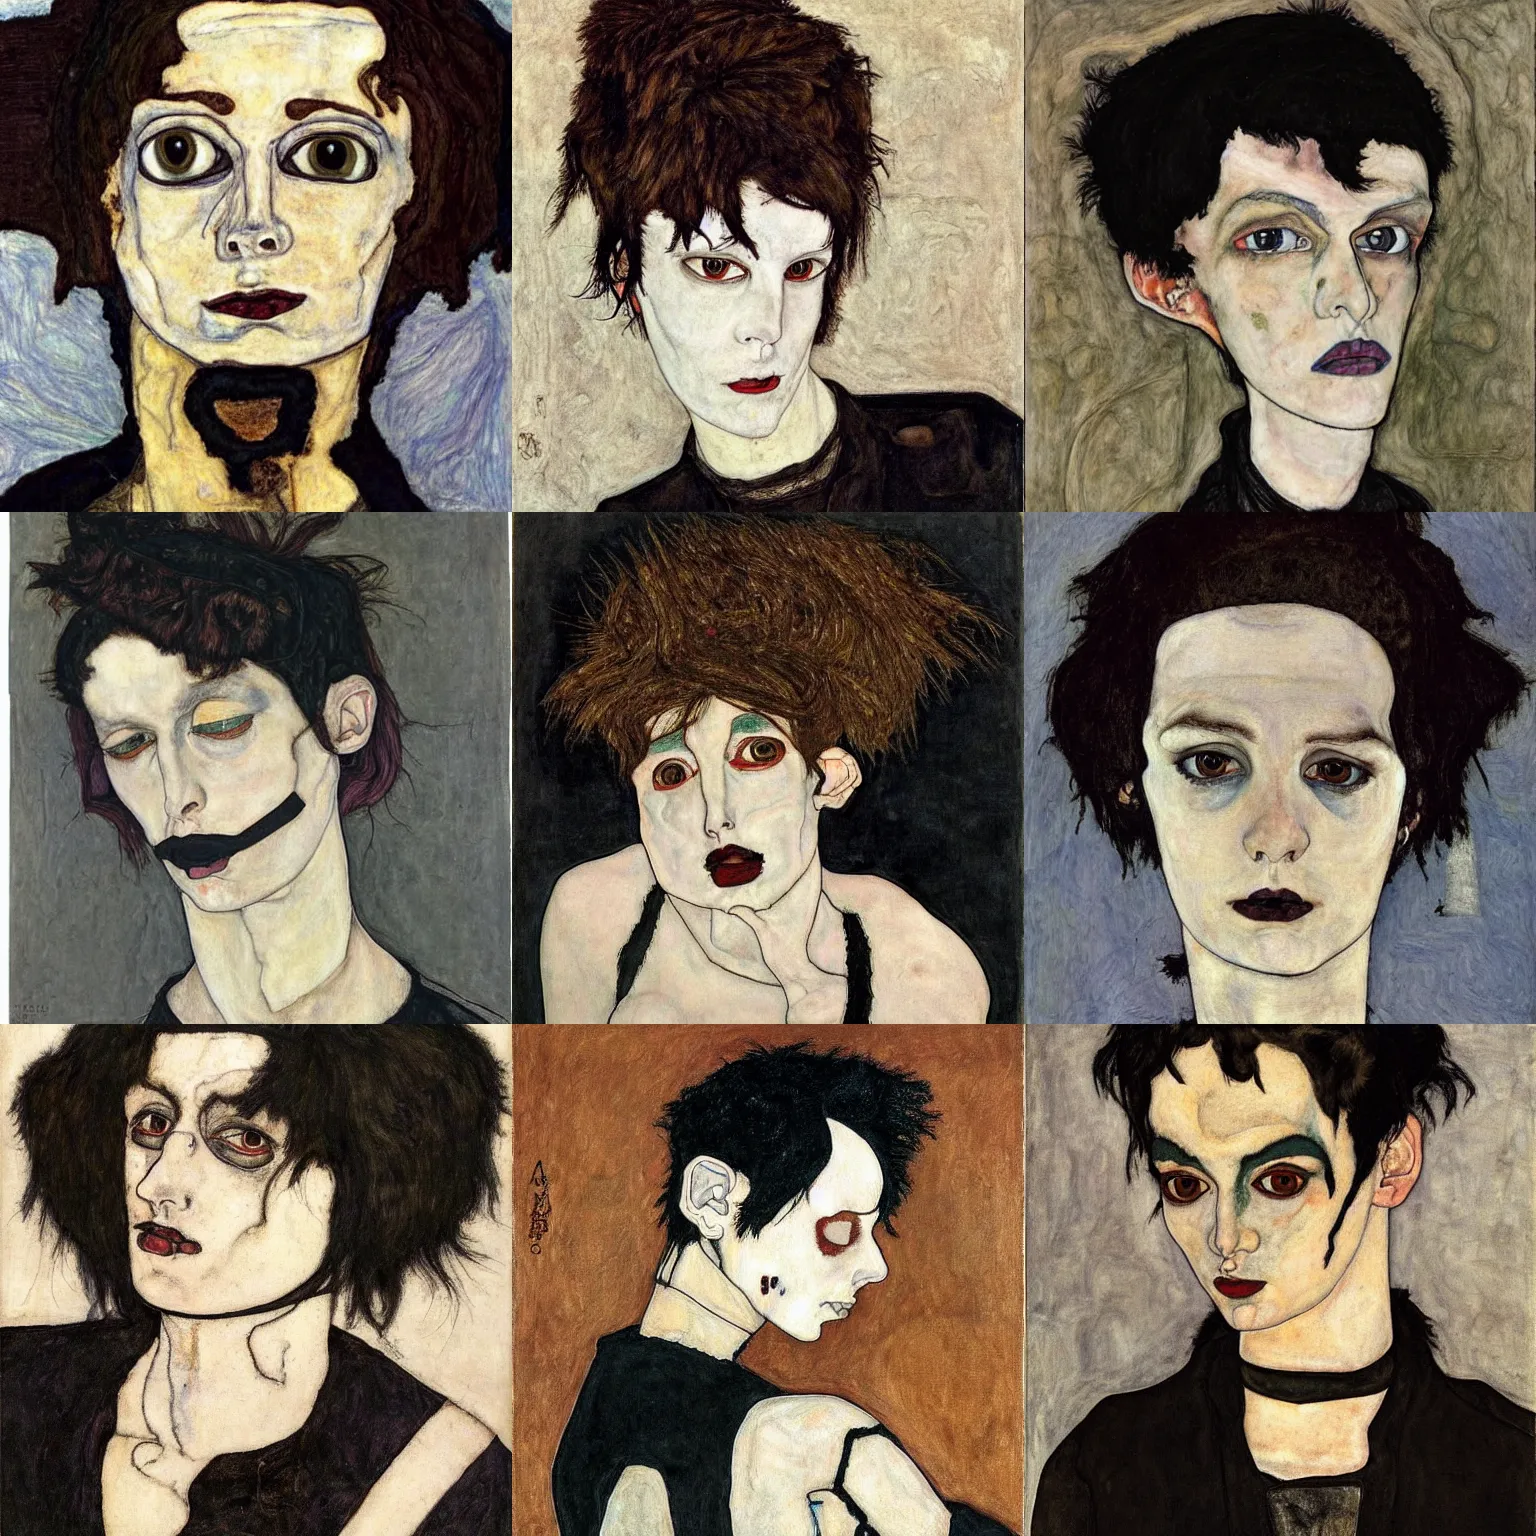 Prompt: A goth painted by Egon Schiele. Her hair is dark brown and cut into a short, messy pixie cut. She has a slightly rounded face, with a pointed chin, large entirely-black eyes, and a small nose. She is wearing a black tank top, a black leather jacket, a black knee-length skirt, a black choker, and black leather boots.